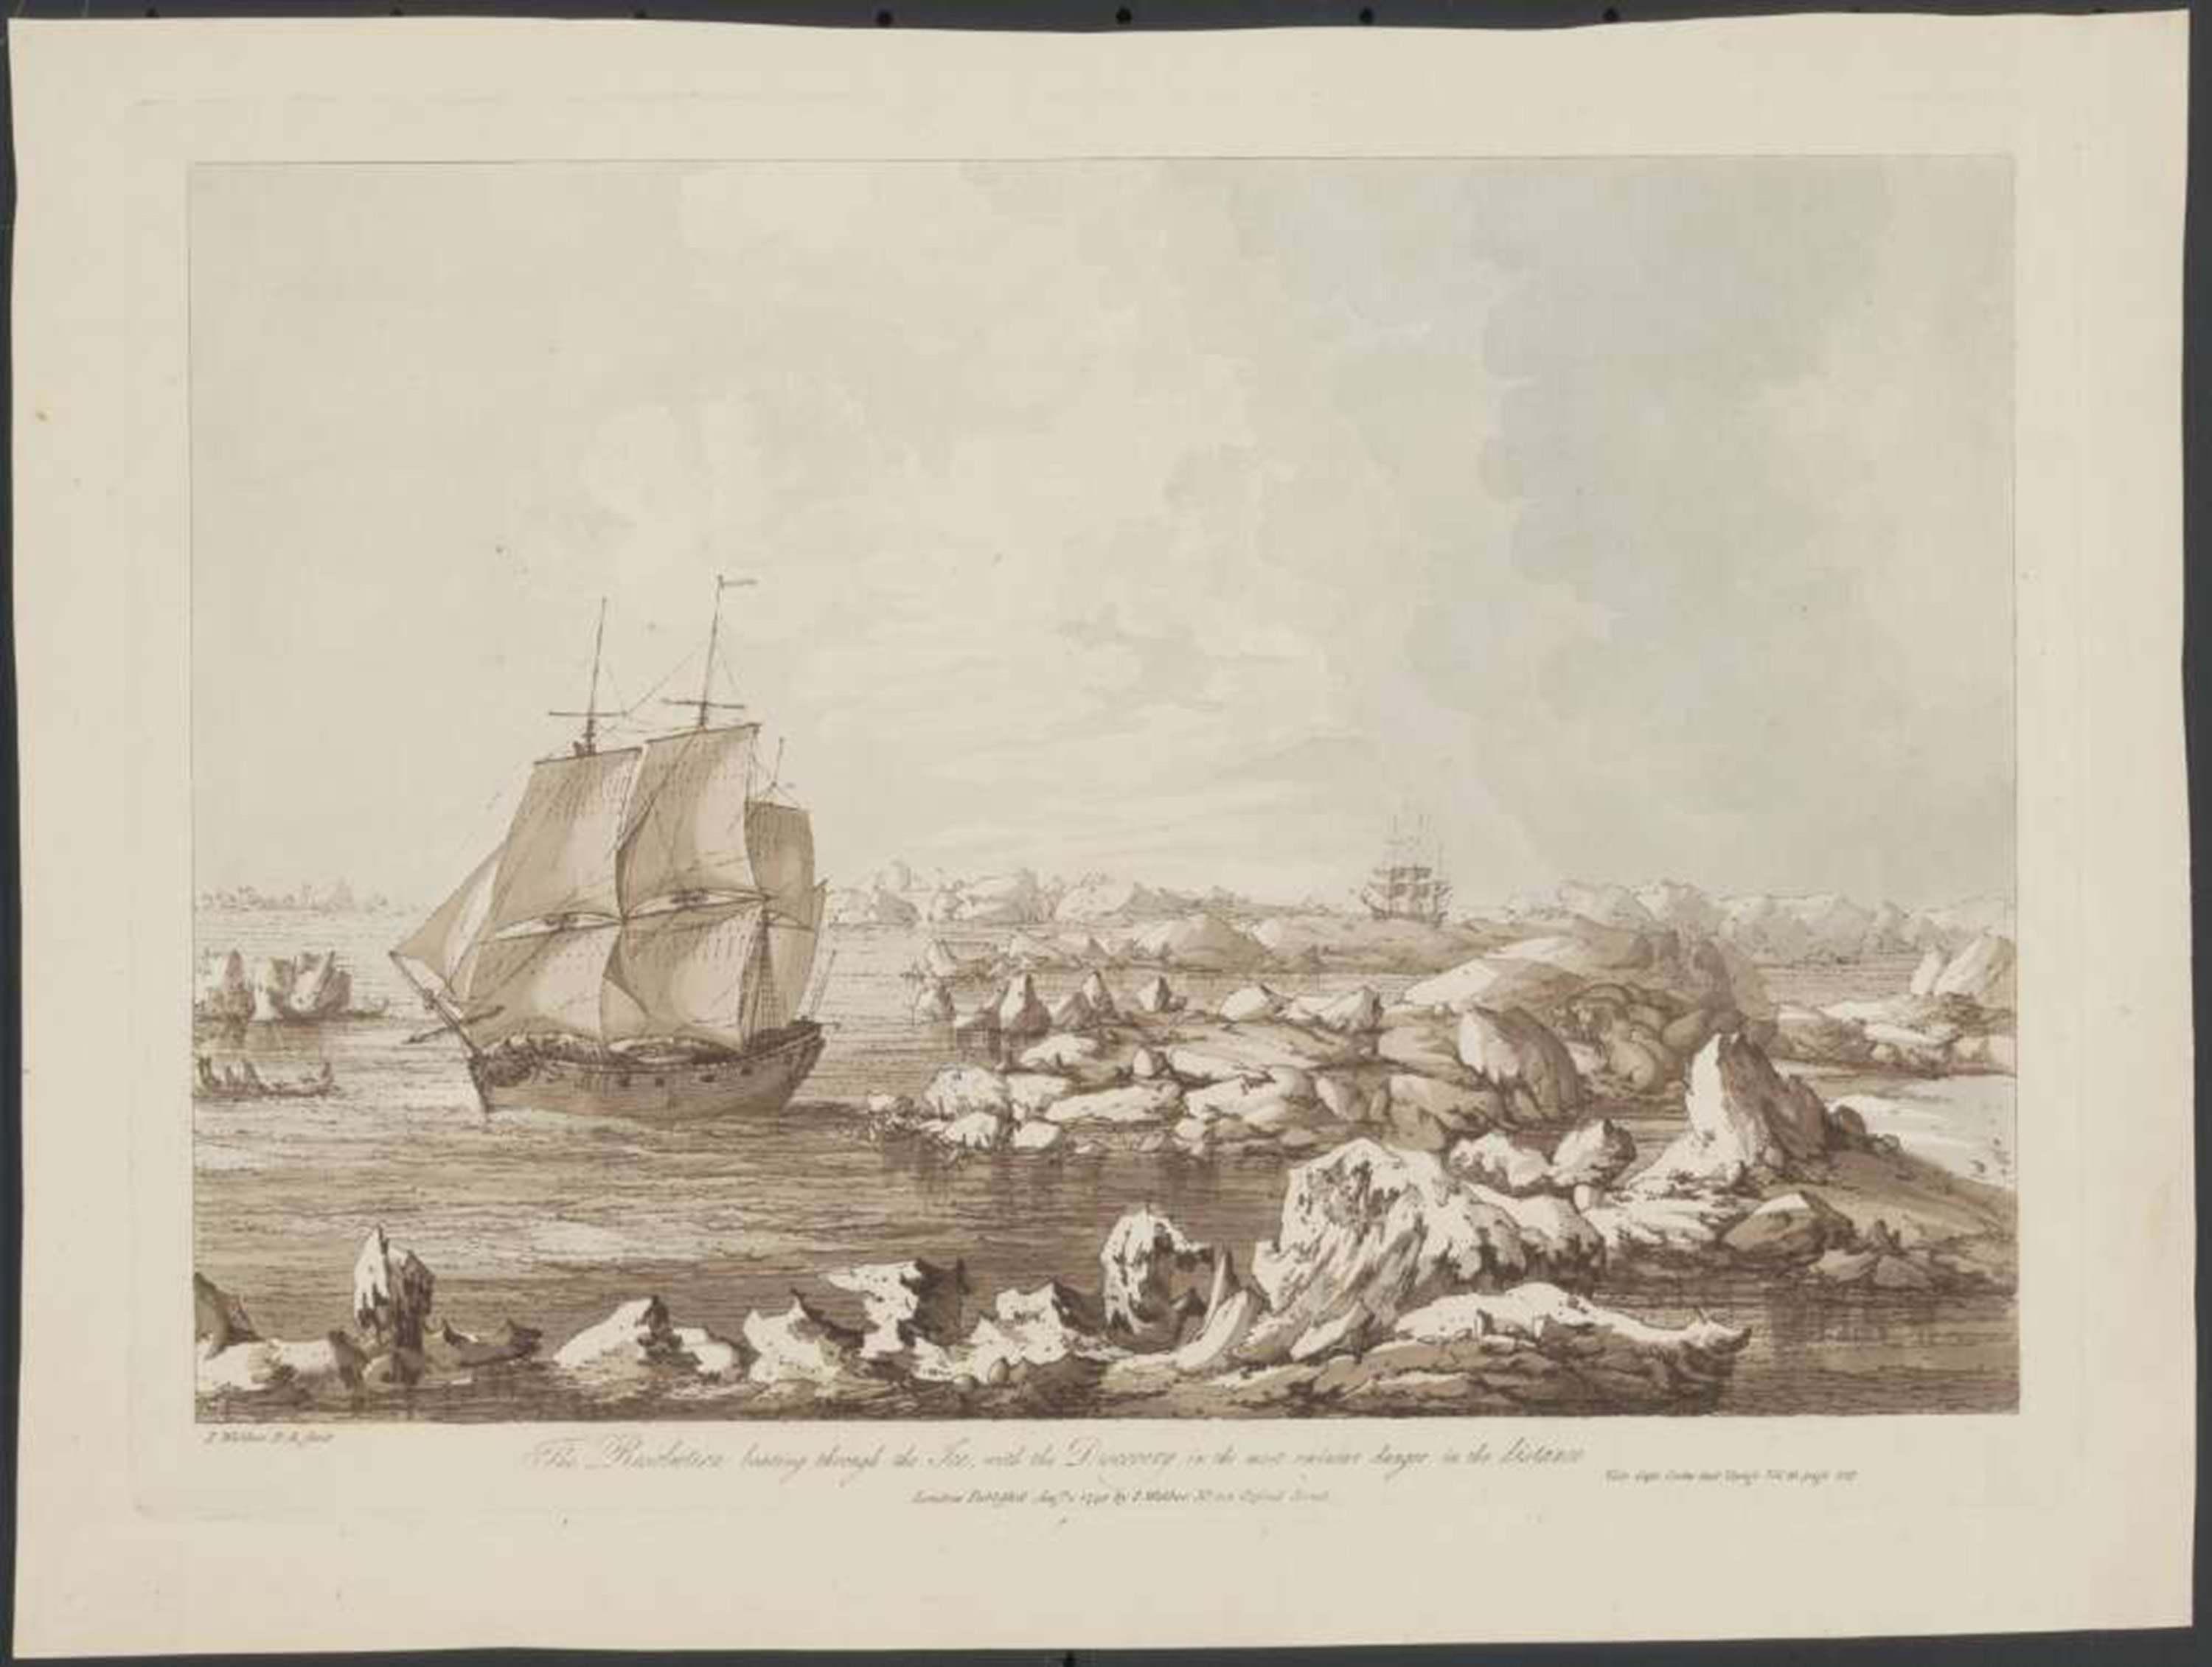 This etching shows Capt. James Cook's ships searching in vain for the Northwest Passage in 1778. The title: "The Resolution beating through the ice, with the Discovery in the most eminent danger in the distance." (John Webber / National Library of Australia via TNS)